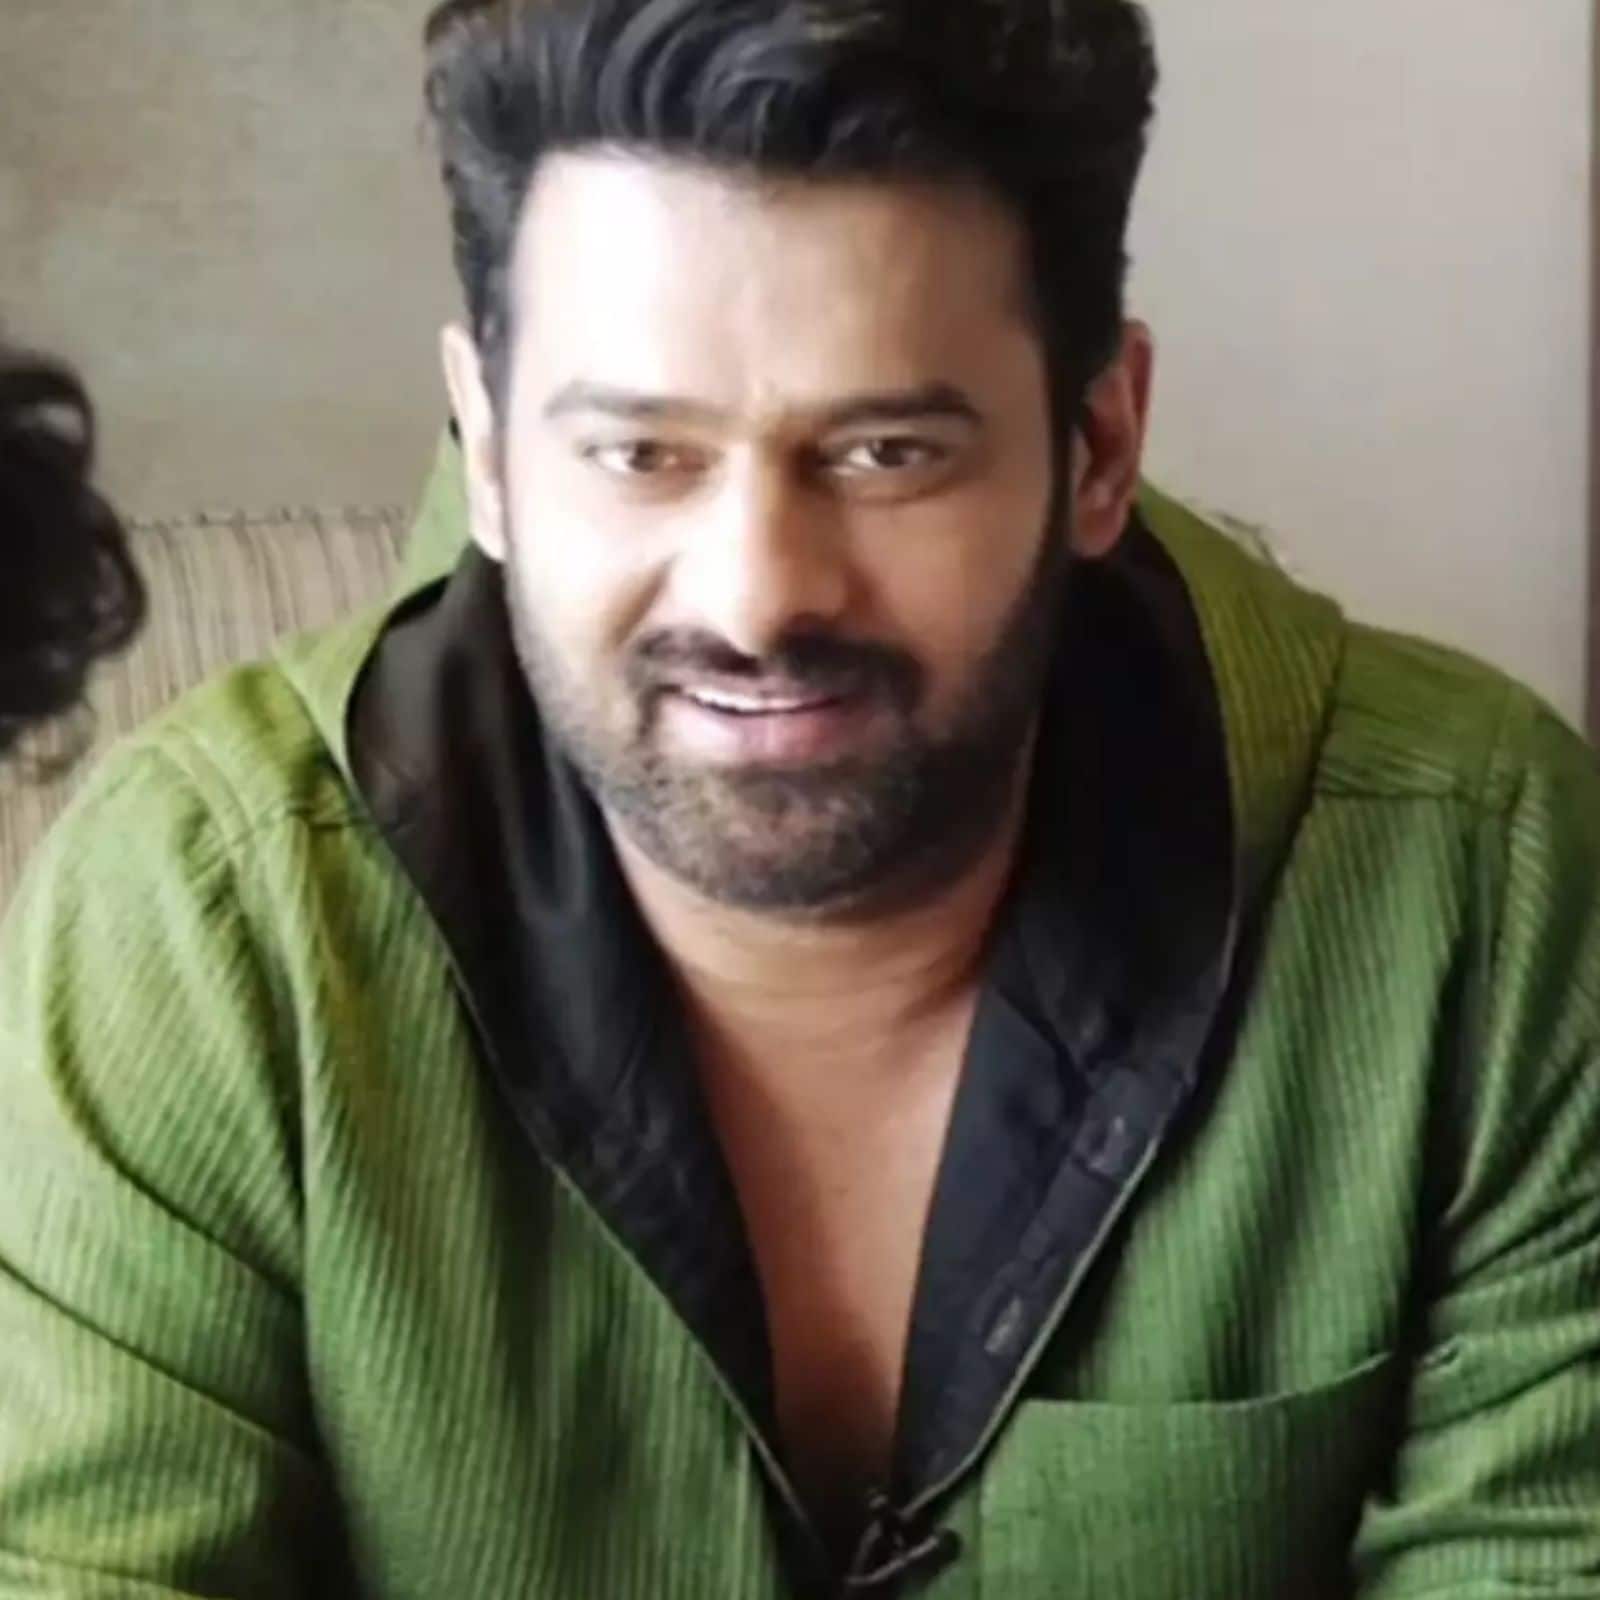 Baahubali star Prabhas to announce marriage after Bollywood debut